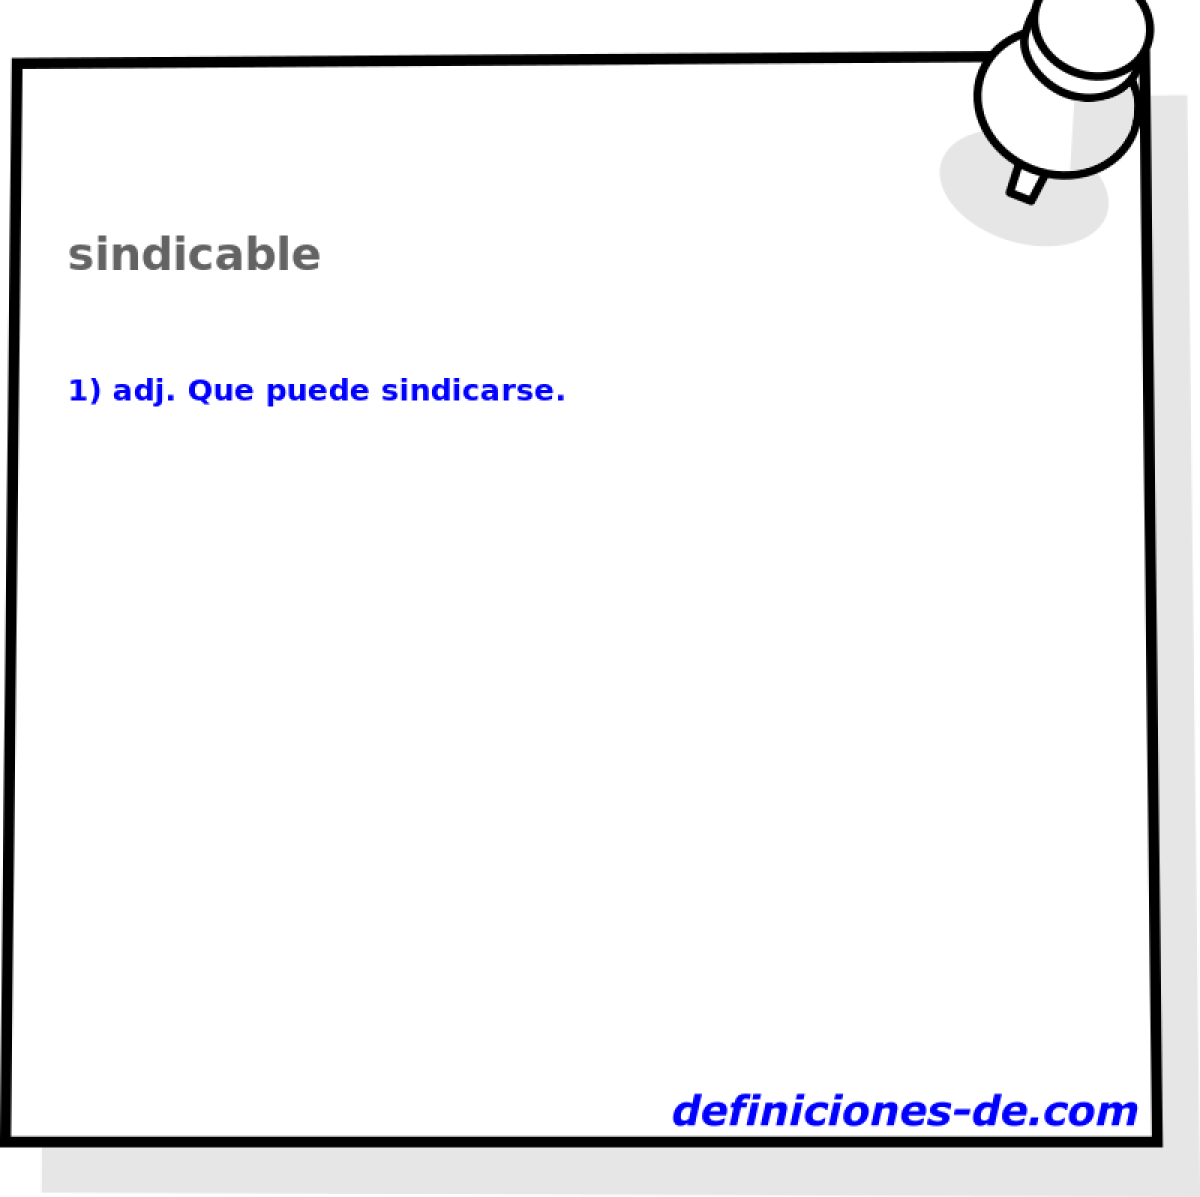 sindicable 